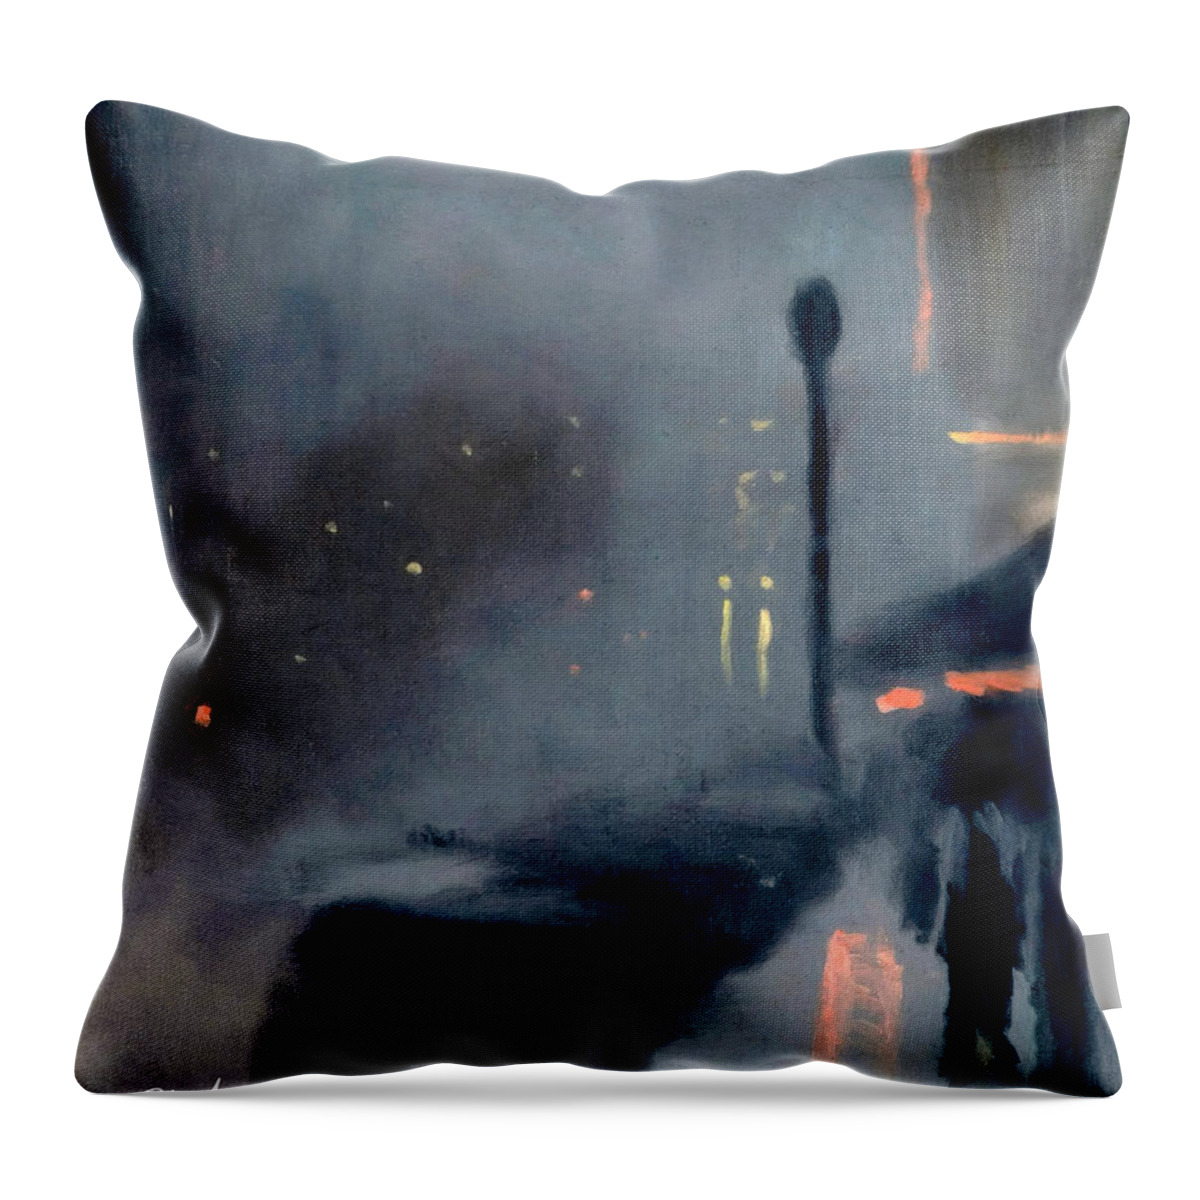 Moody Landscape Throw Pillow featuring the digital art Rainy Night Out by Chris Armytage